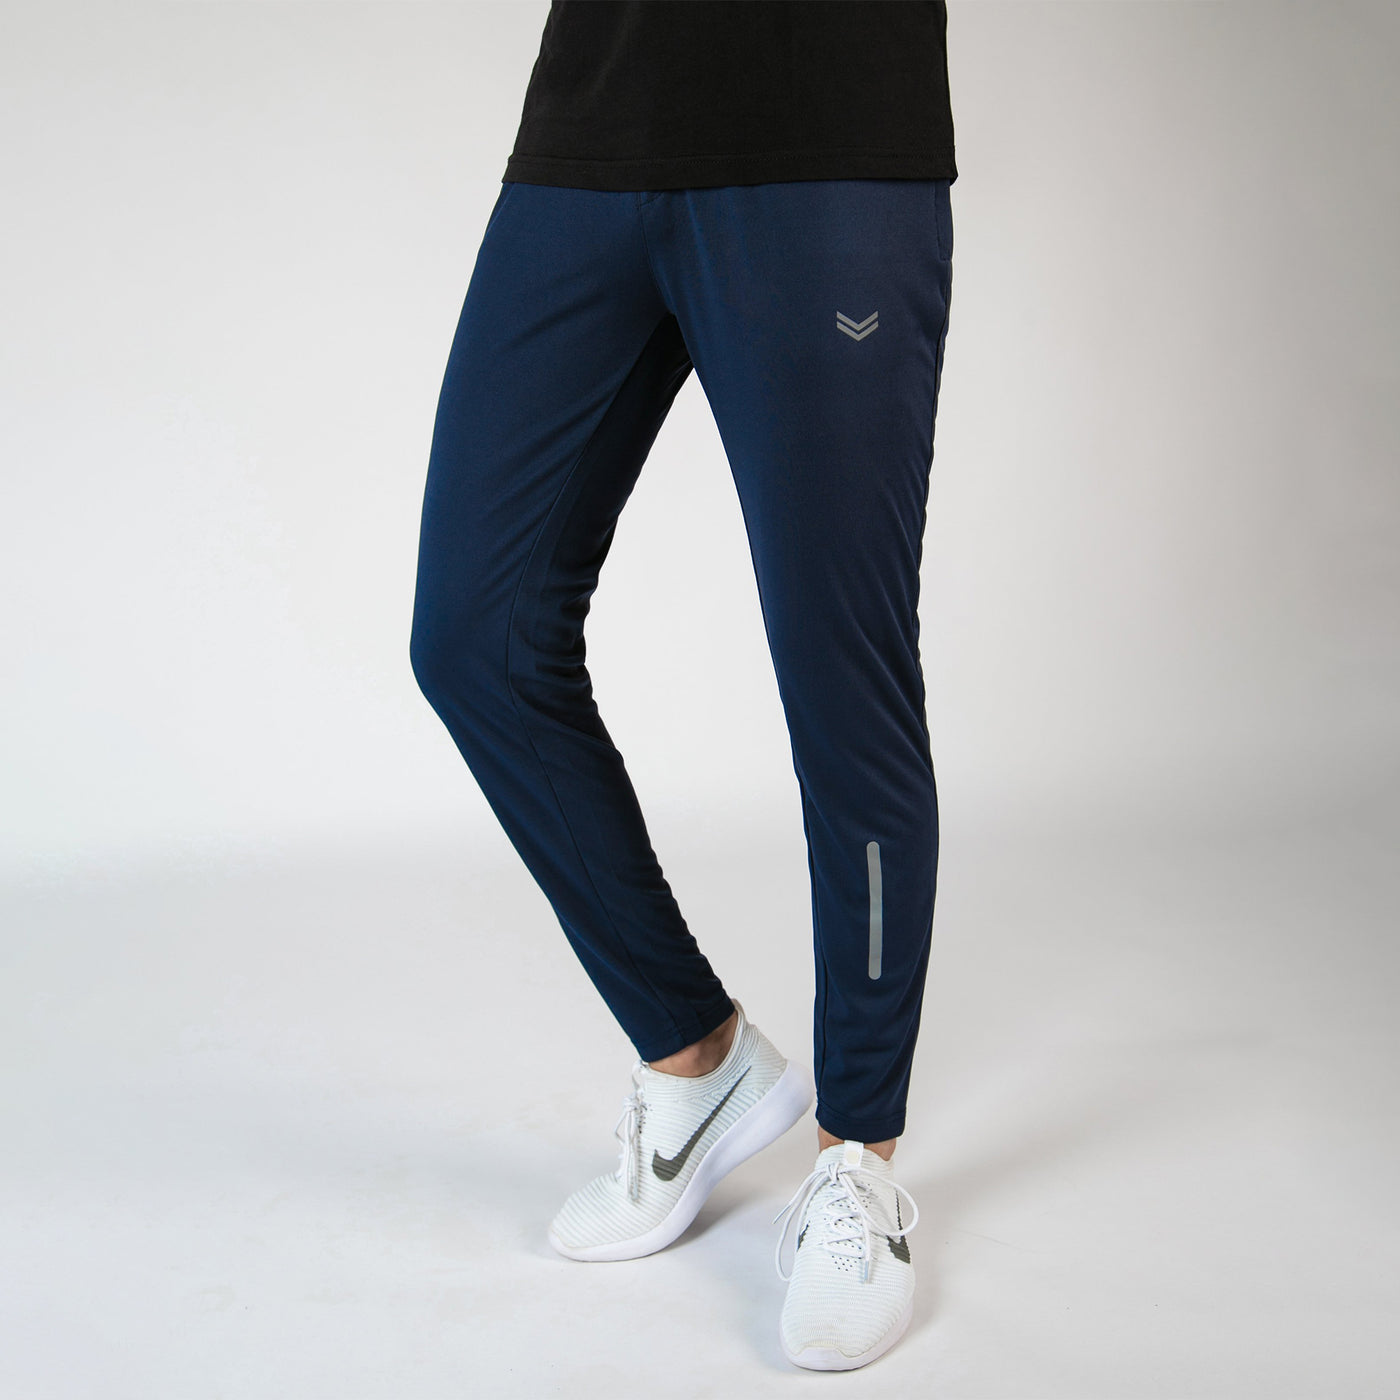 Navy Quick Dry Bottoms With Reflective Detailing